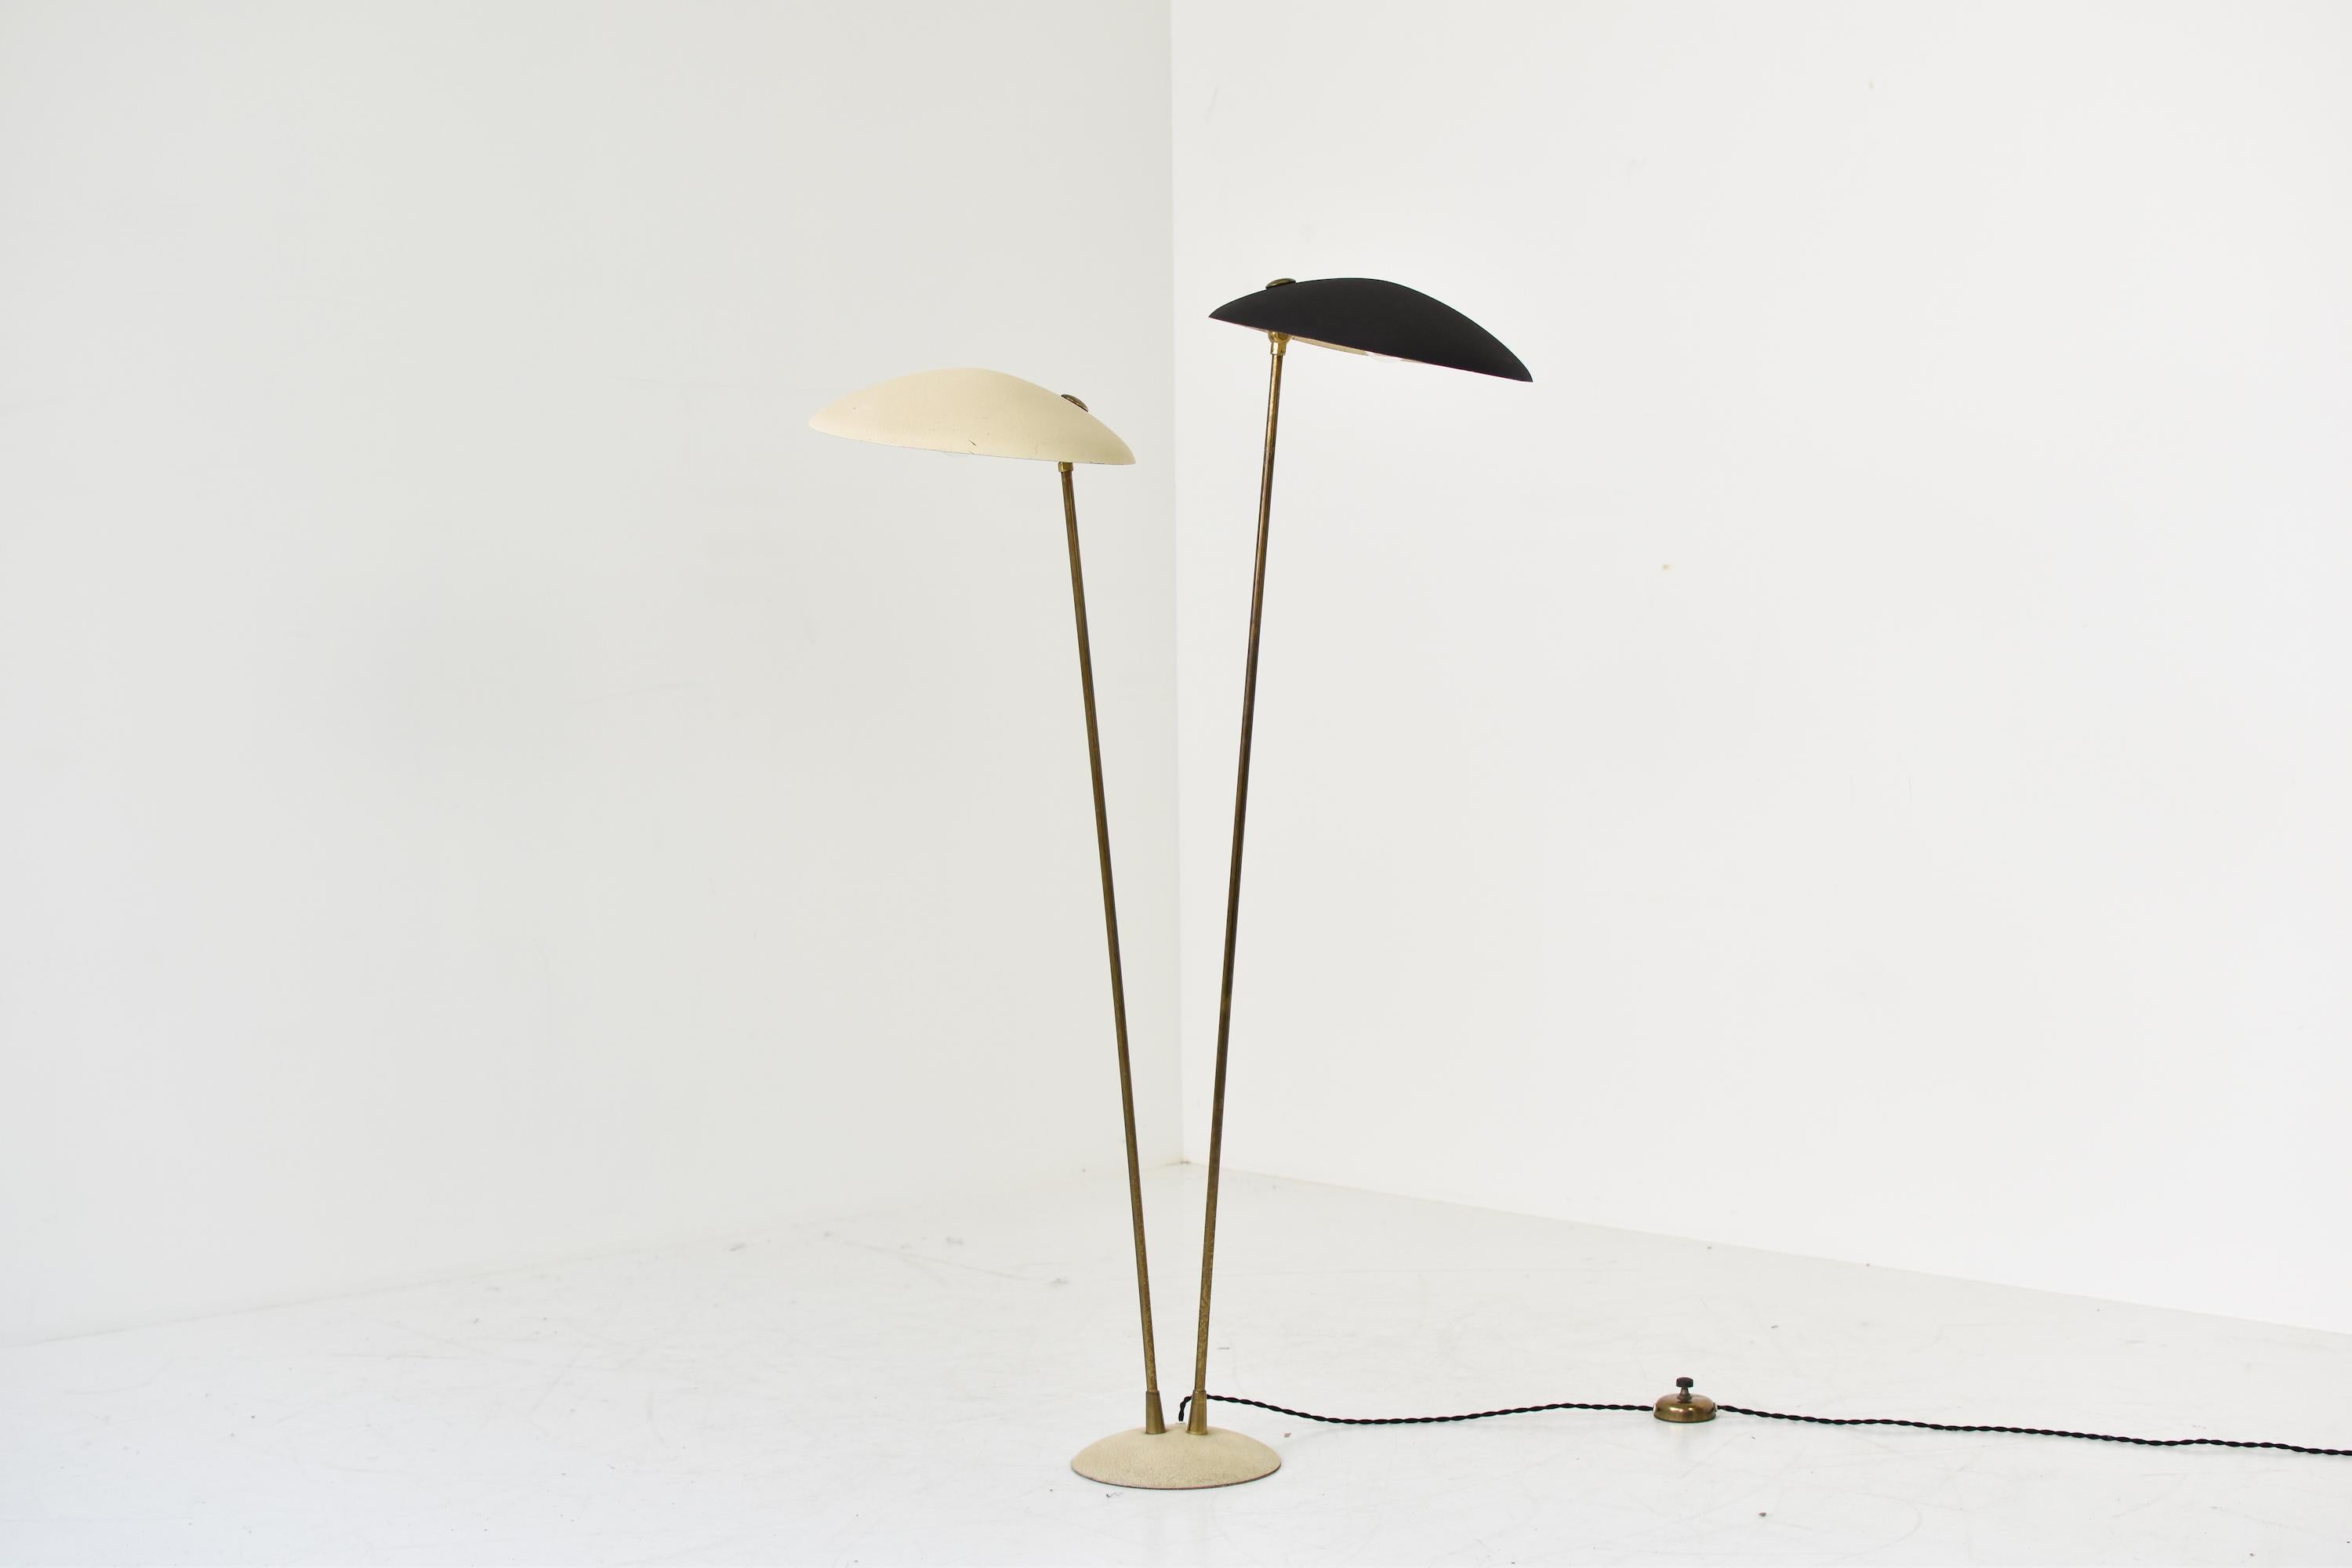 Exceptional floor lamp from Italy, designed in the 1960s in the manner of Stilnovo. This floor lamp features two beige and black lacquered shades mounted on brass stems. Newly rewired and features the original light-switch. Designer (for know)